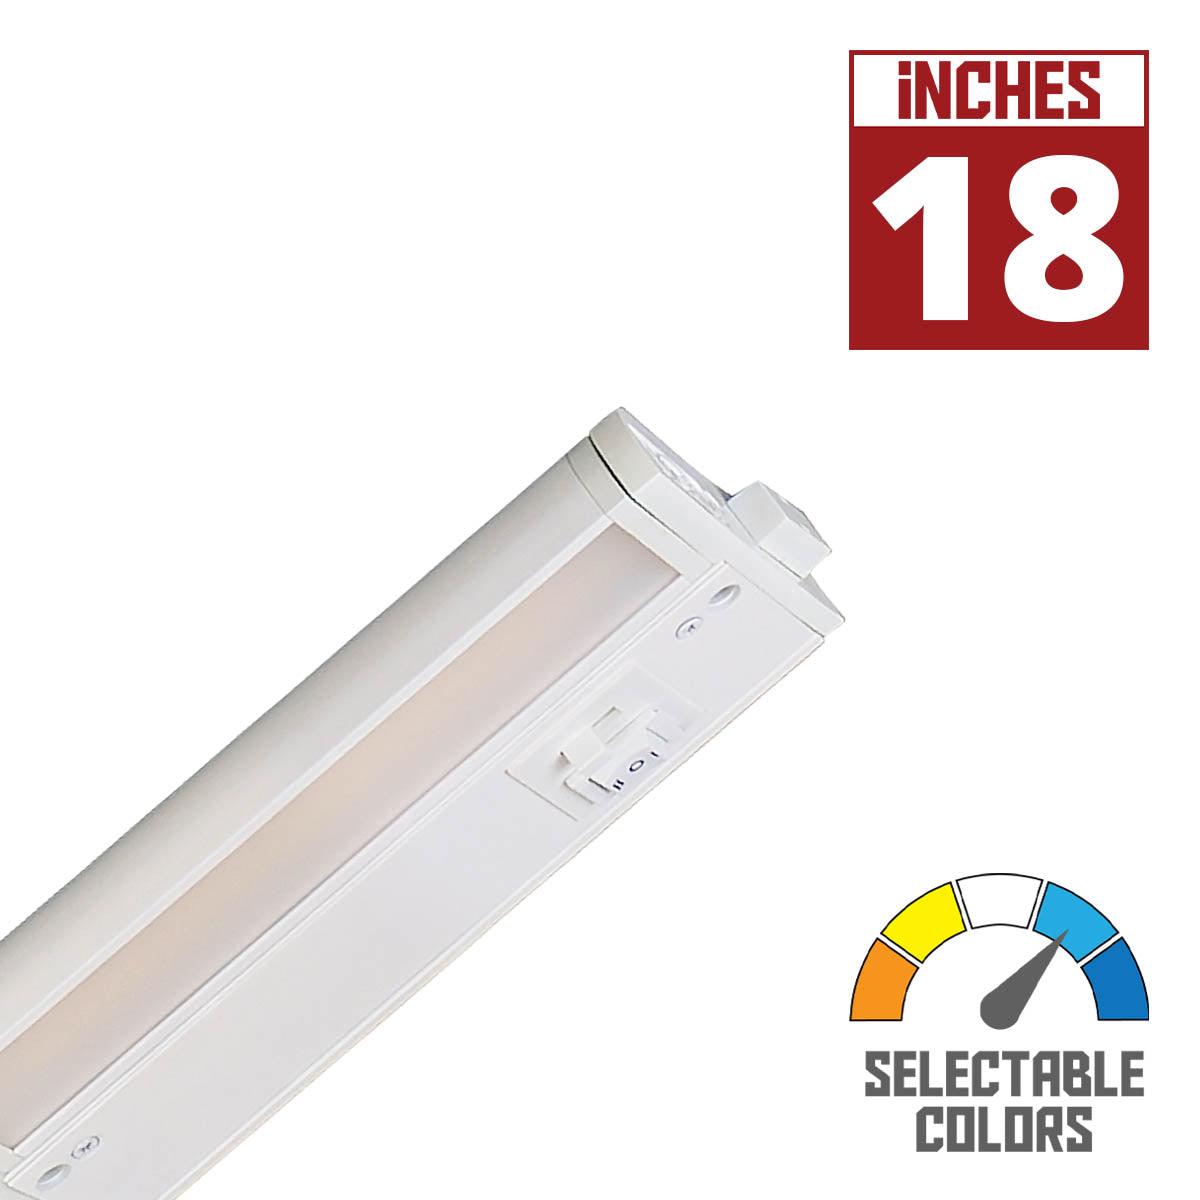 CounterMax 5K 18 Inch Under Cabinet LED Light with Patent gimbals, 1200 Lumens, Linkable, CCT Selectable 2700K to 5000K, 120V